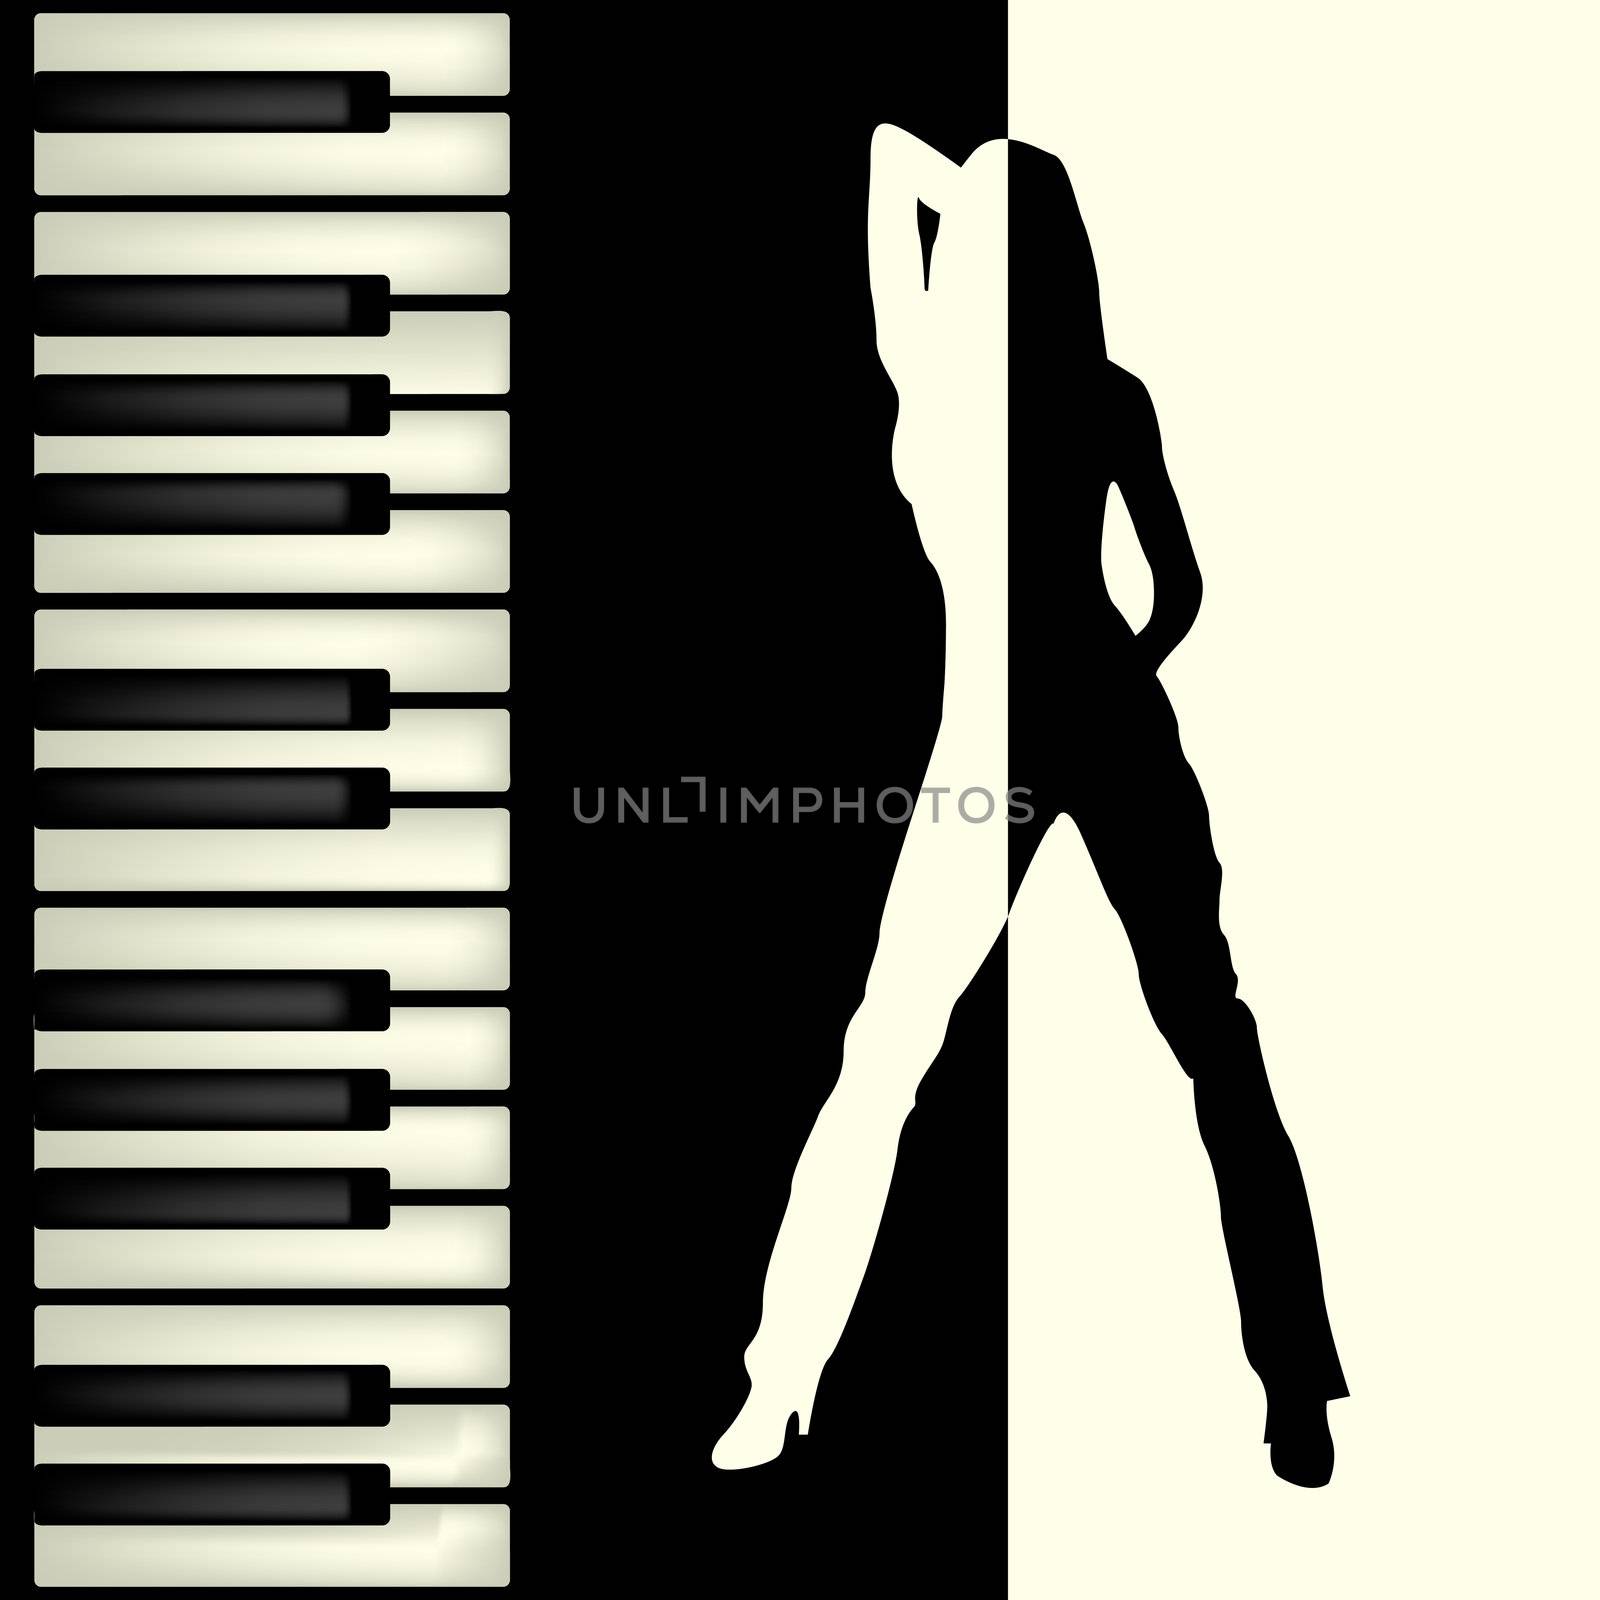 Abstract background with piano keys and dancing girl silhouette